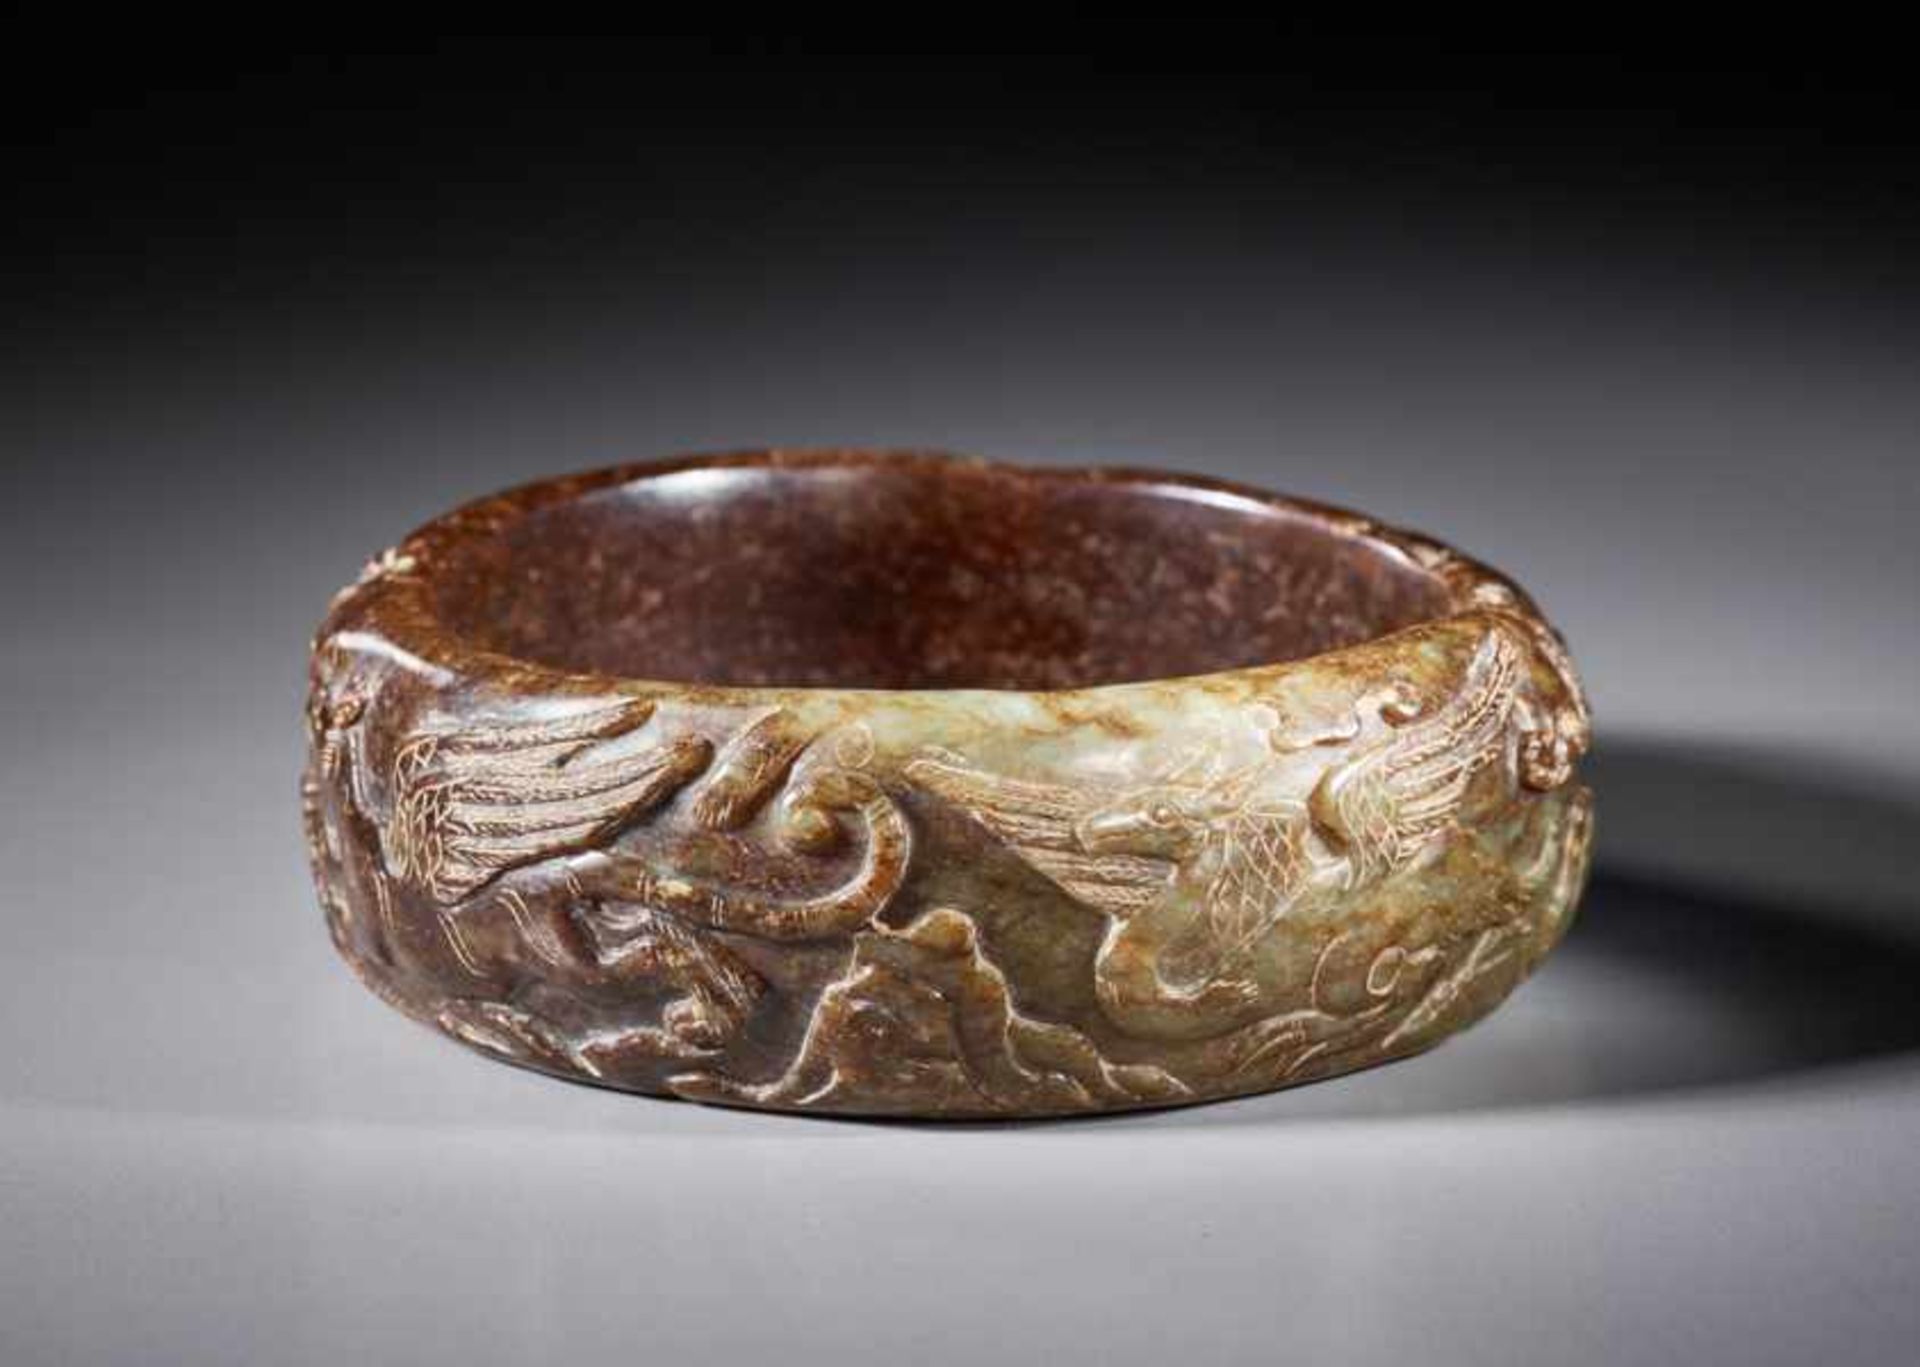 BRACELET (ZHUO) WITH MYSTICAL ANIMALS Jade. China, late Ming to early Qing, 17th century瑞獸玉鐲A